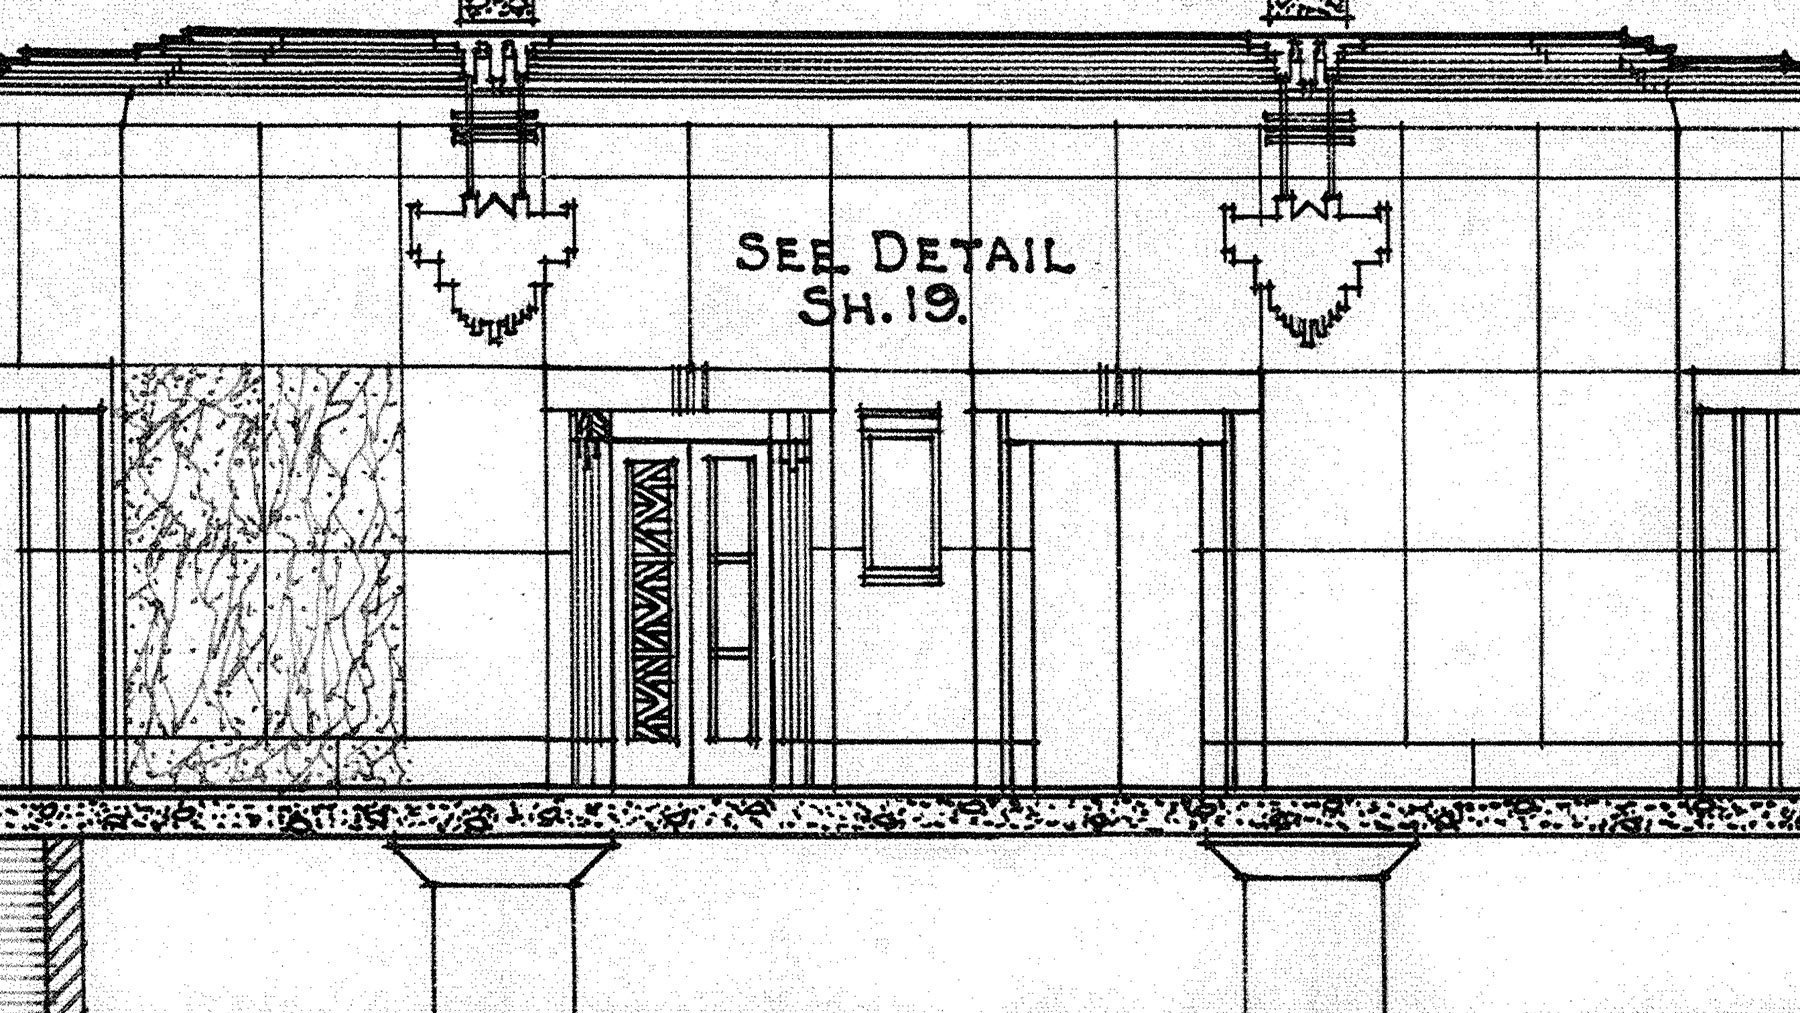 The Dominion Public Building: The Architectural Drawings - Sections e and F